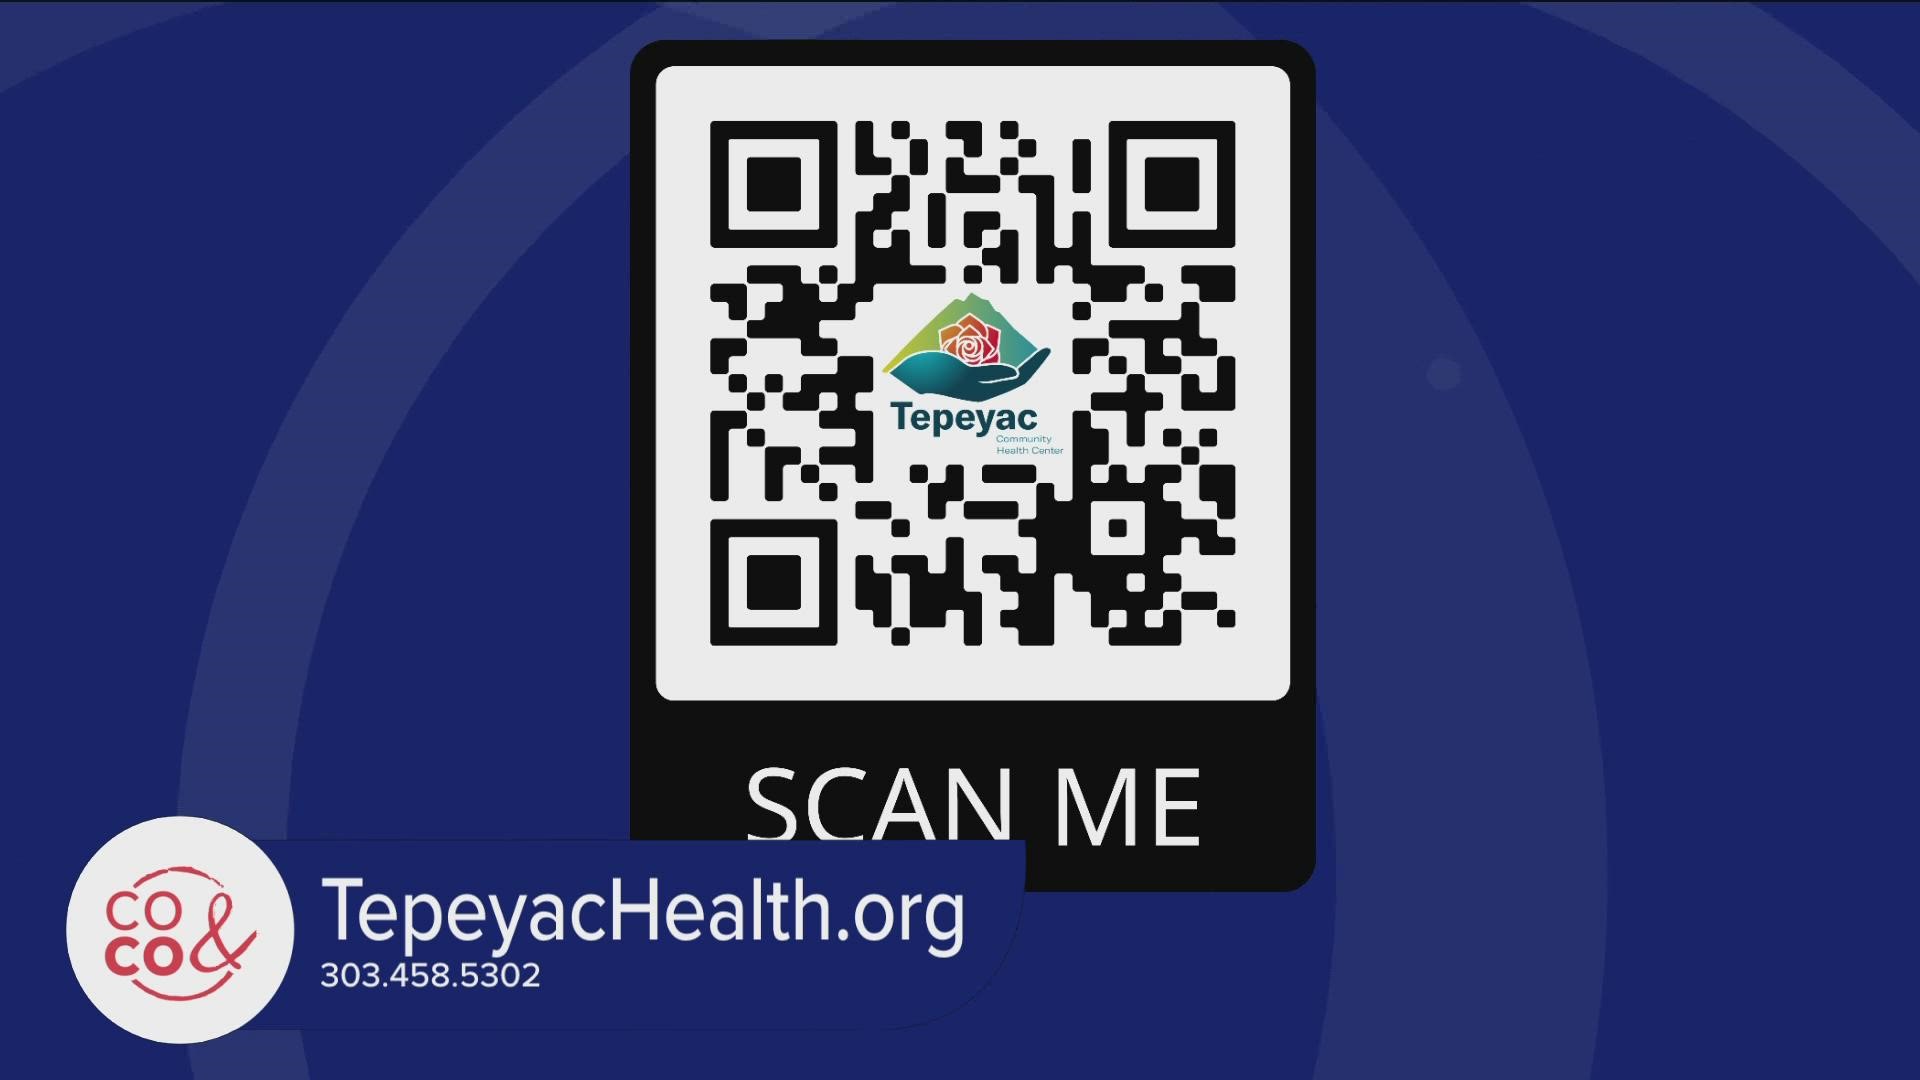 Scan the QR Code or visit TepeyacHealth.org for more back to school tips or community health resources.